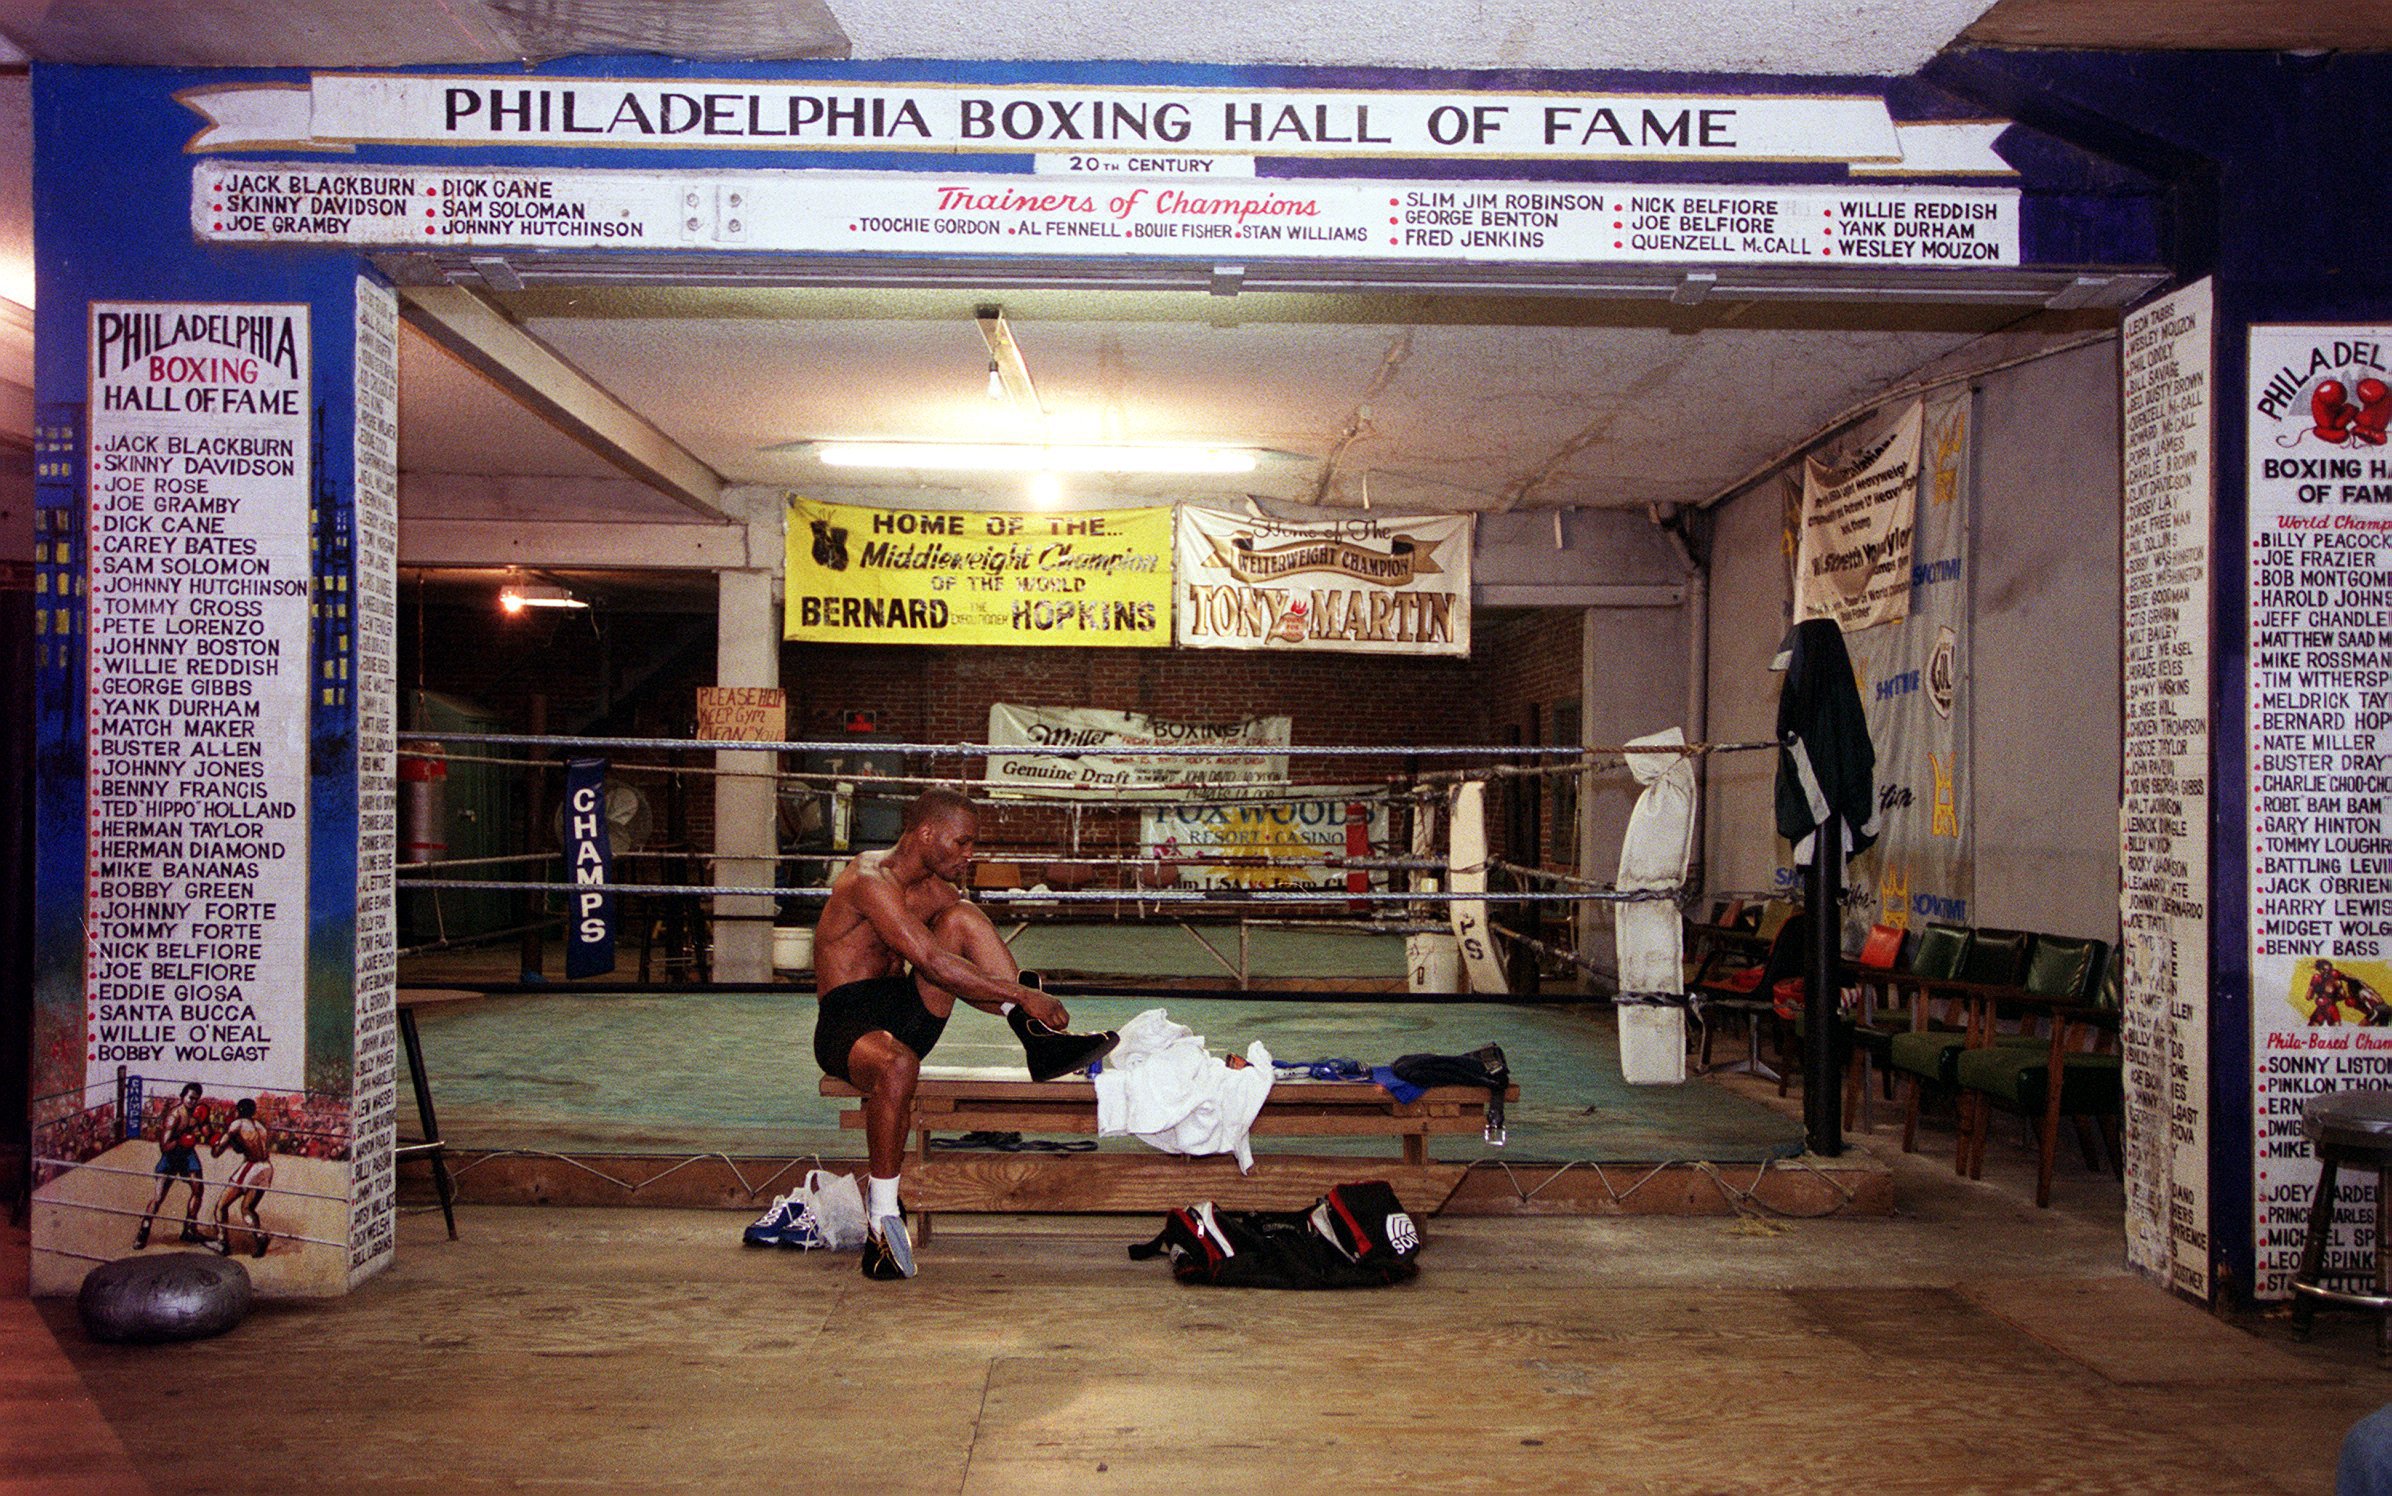 Bernard Hopkins Hall of Fame career started with a prison visit from Rudy Battle pic pic